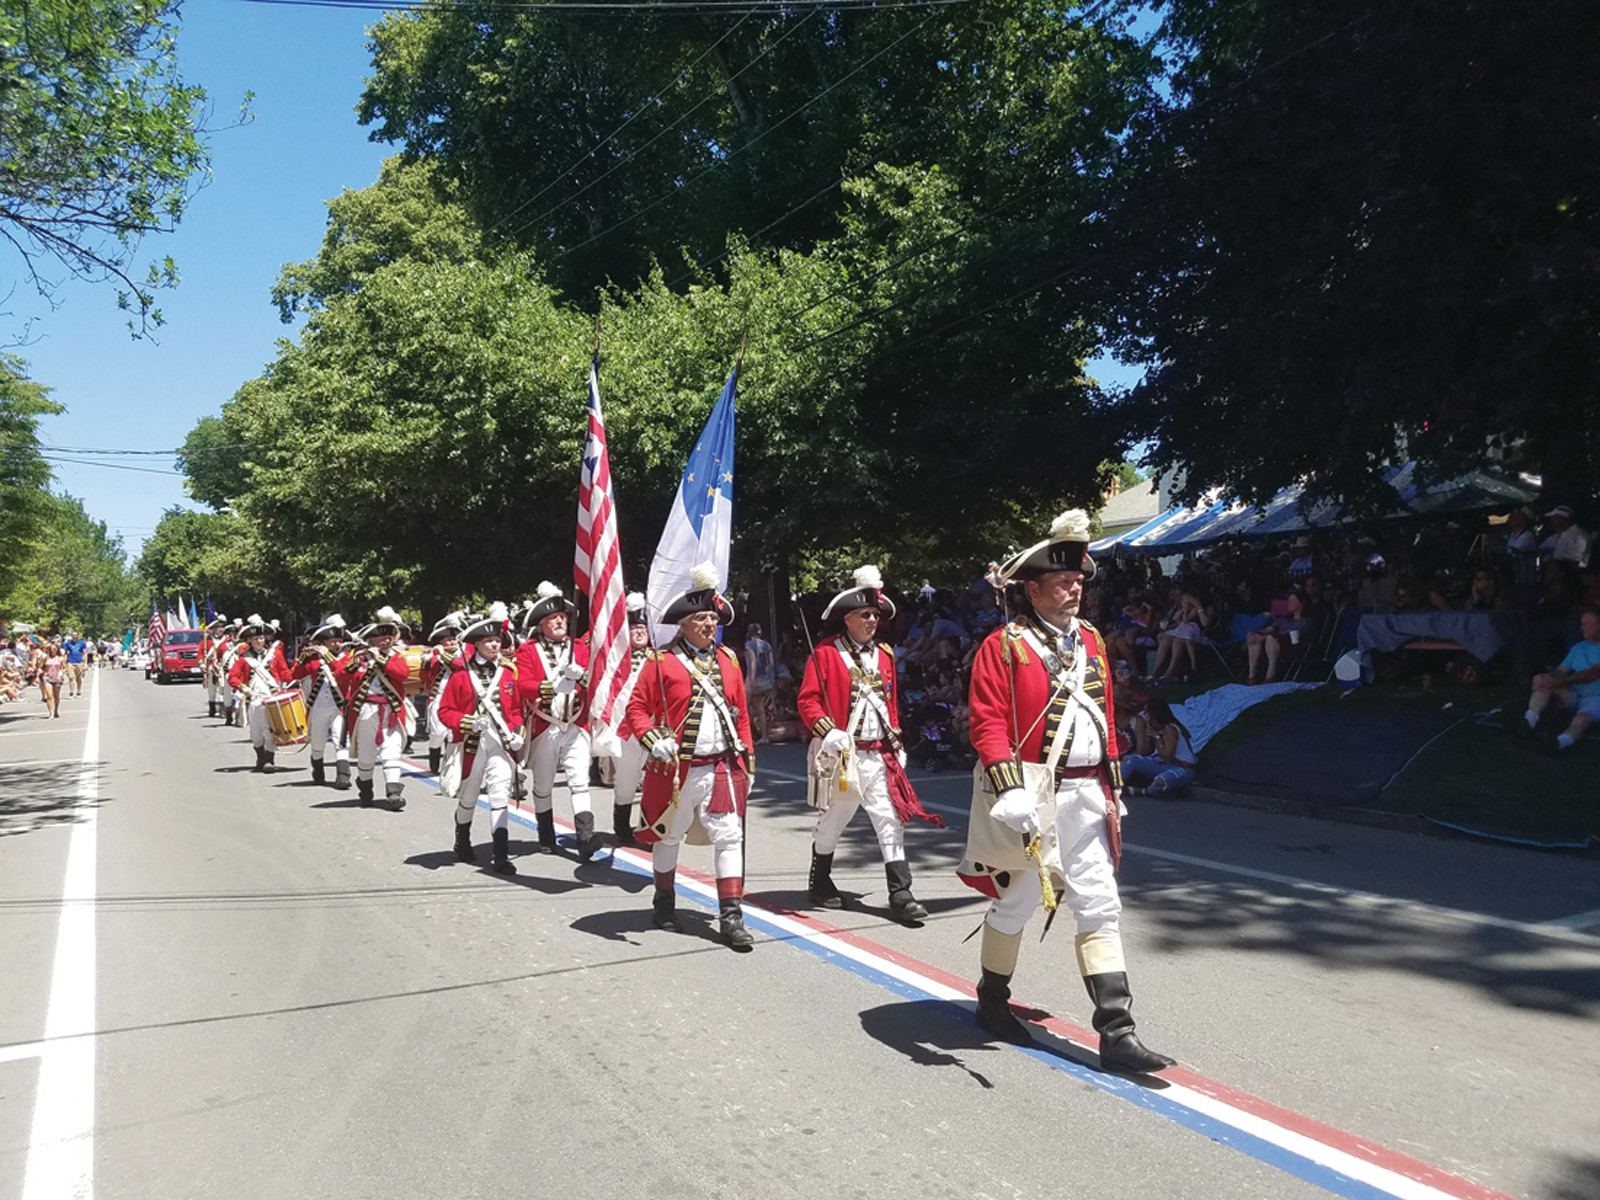 City takes part in historic parade Cranston Herald